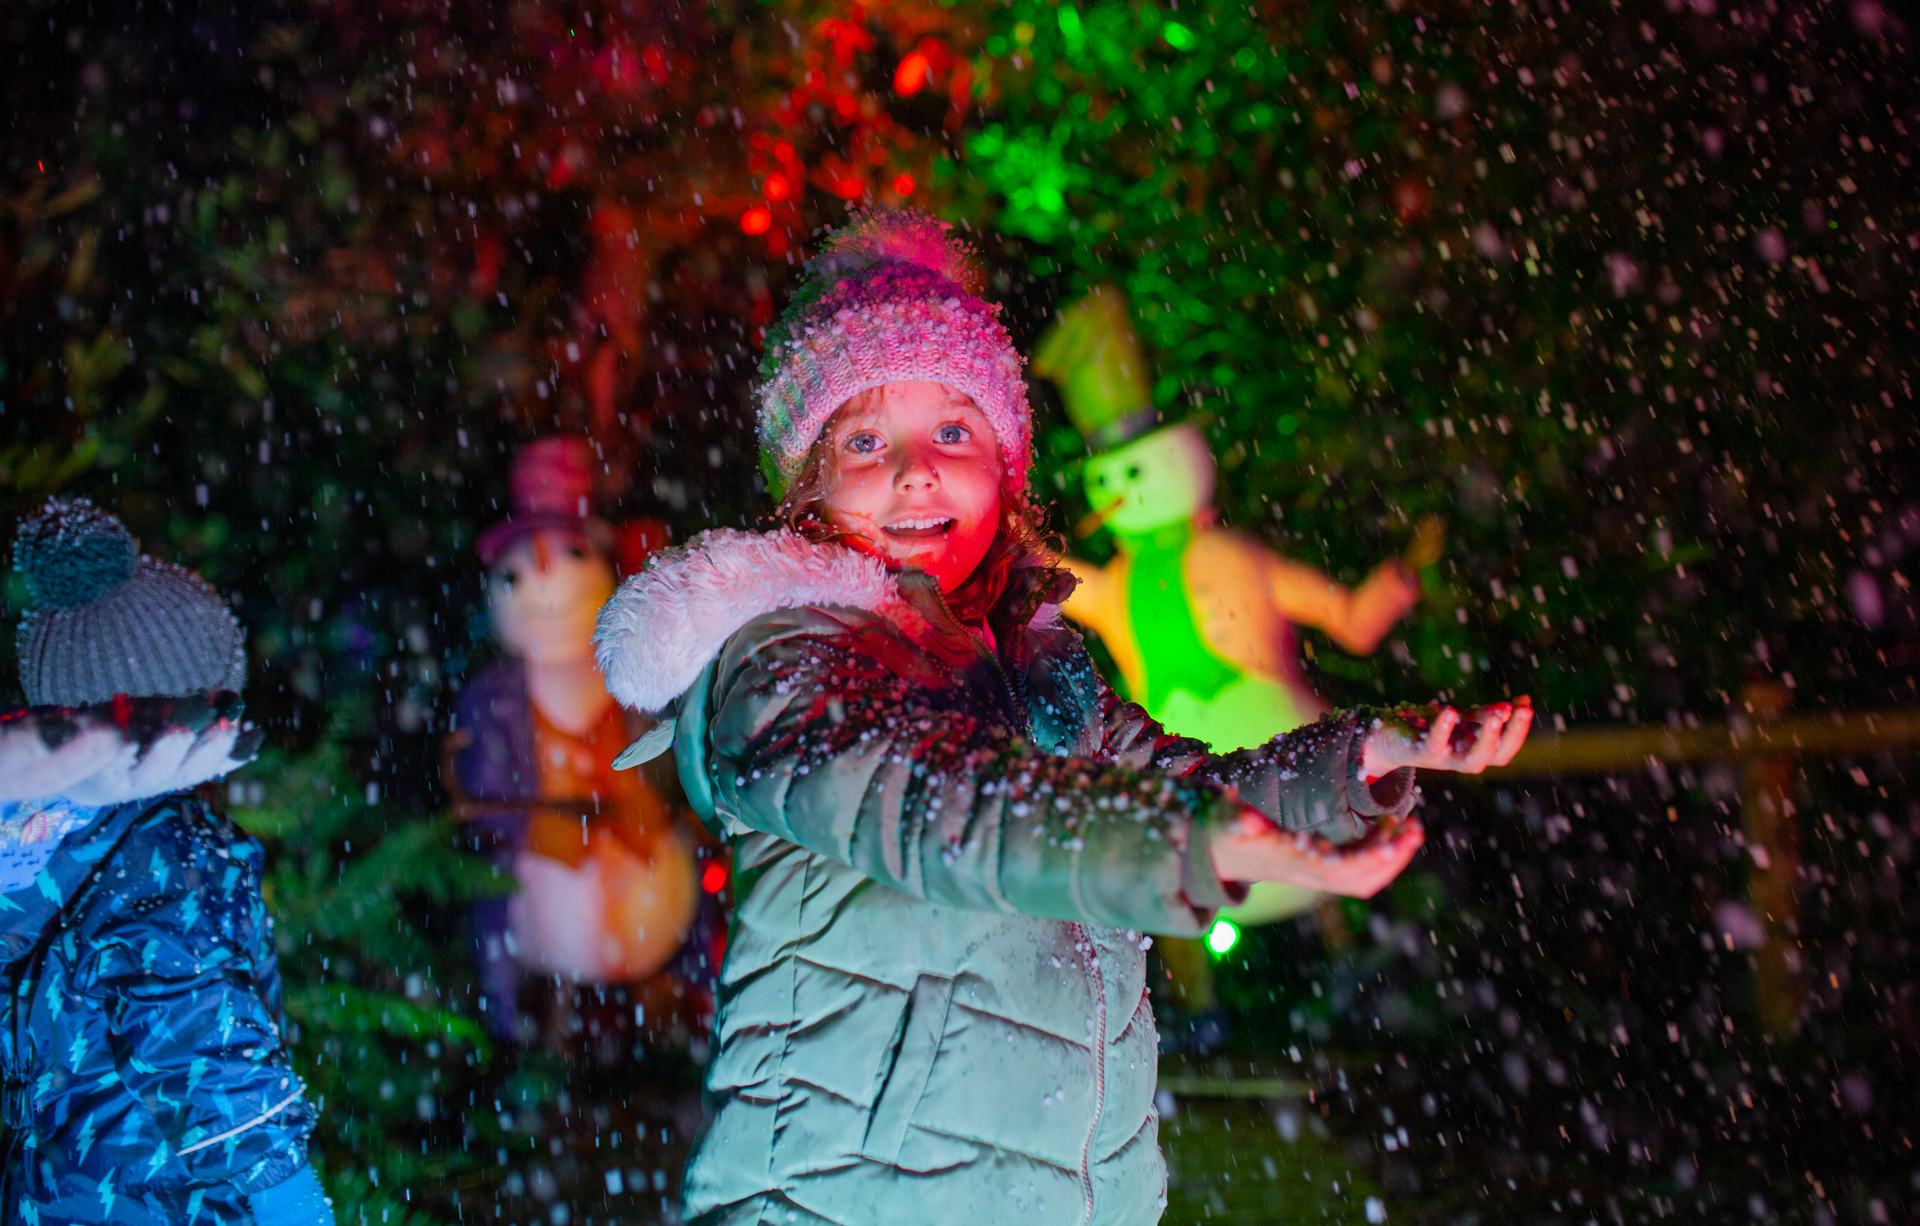 BeWILDerwood Presents Christmas – A Sparkly Light & Panto Trail